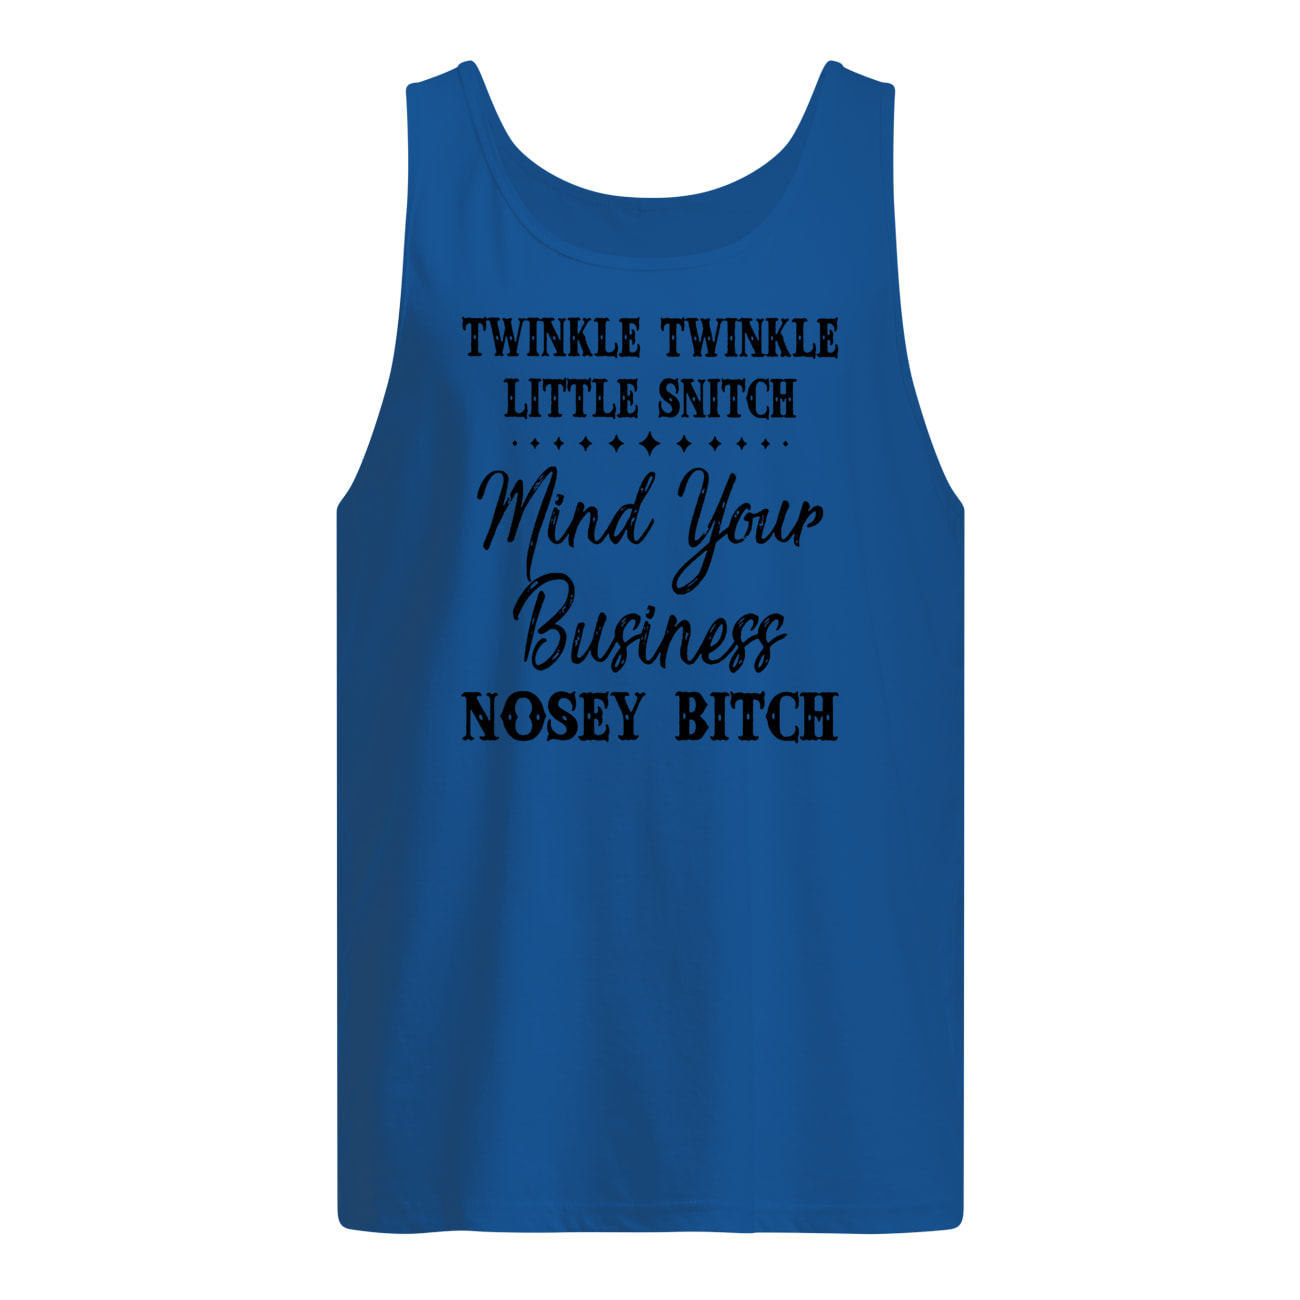 Twinkle twinkle little snitch mind your own business you nosey bitch tank top